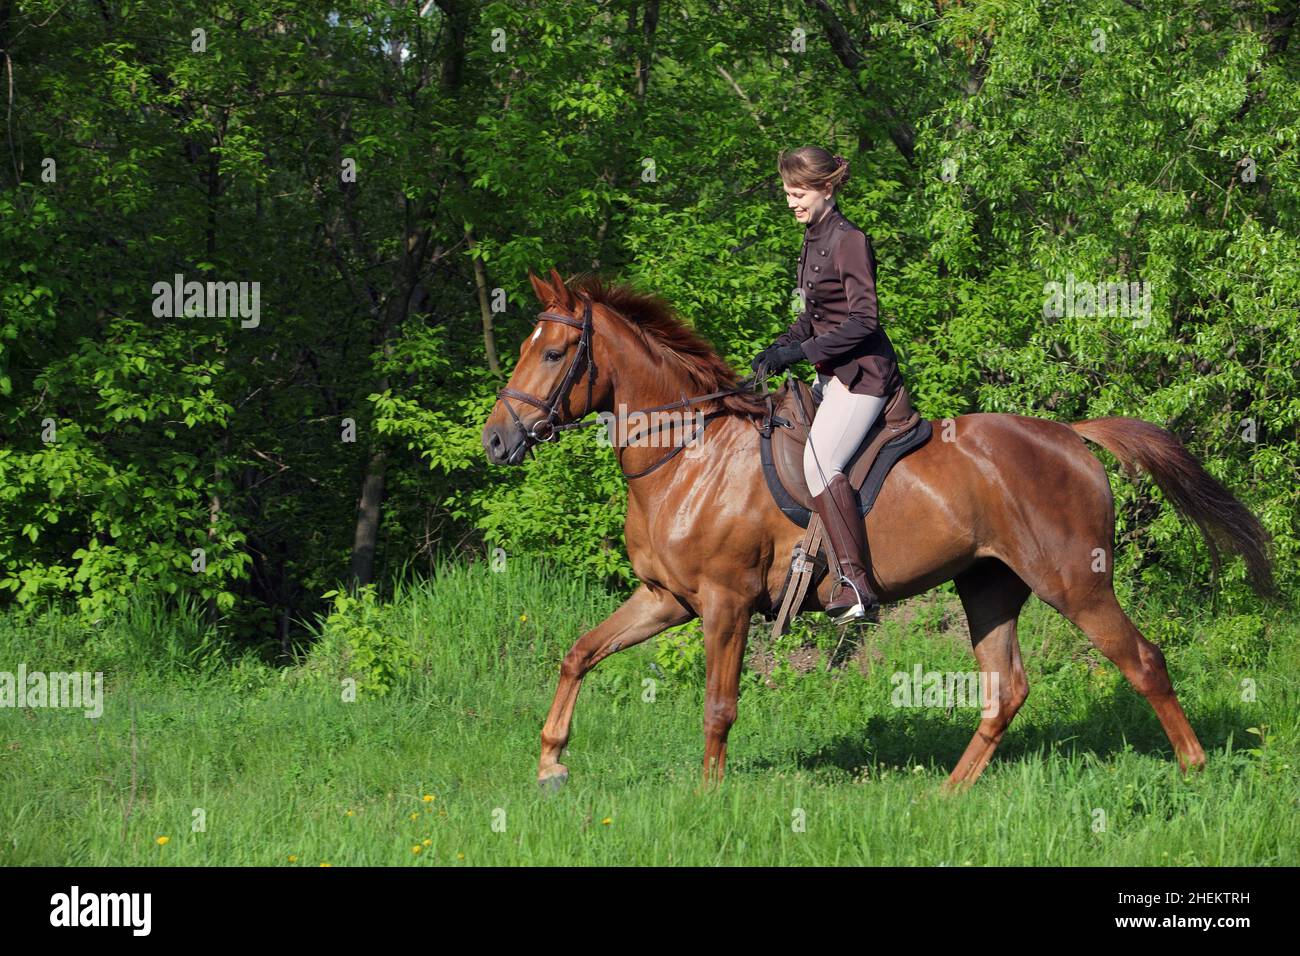 Beautiful equestrian women rides galloping horse in woods glade at sunset Stock Photo